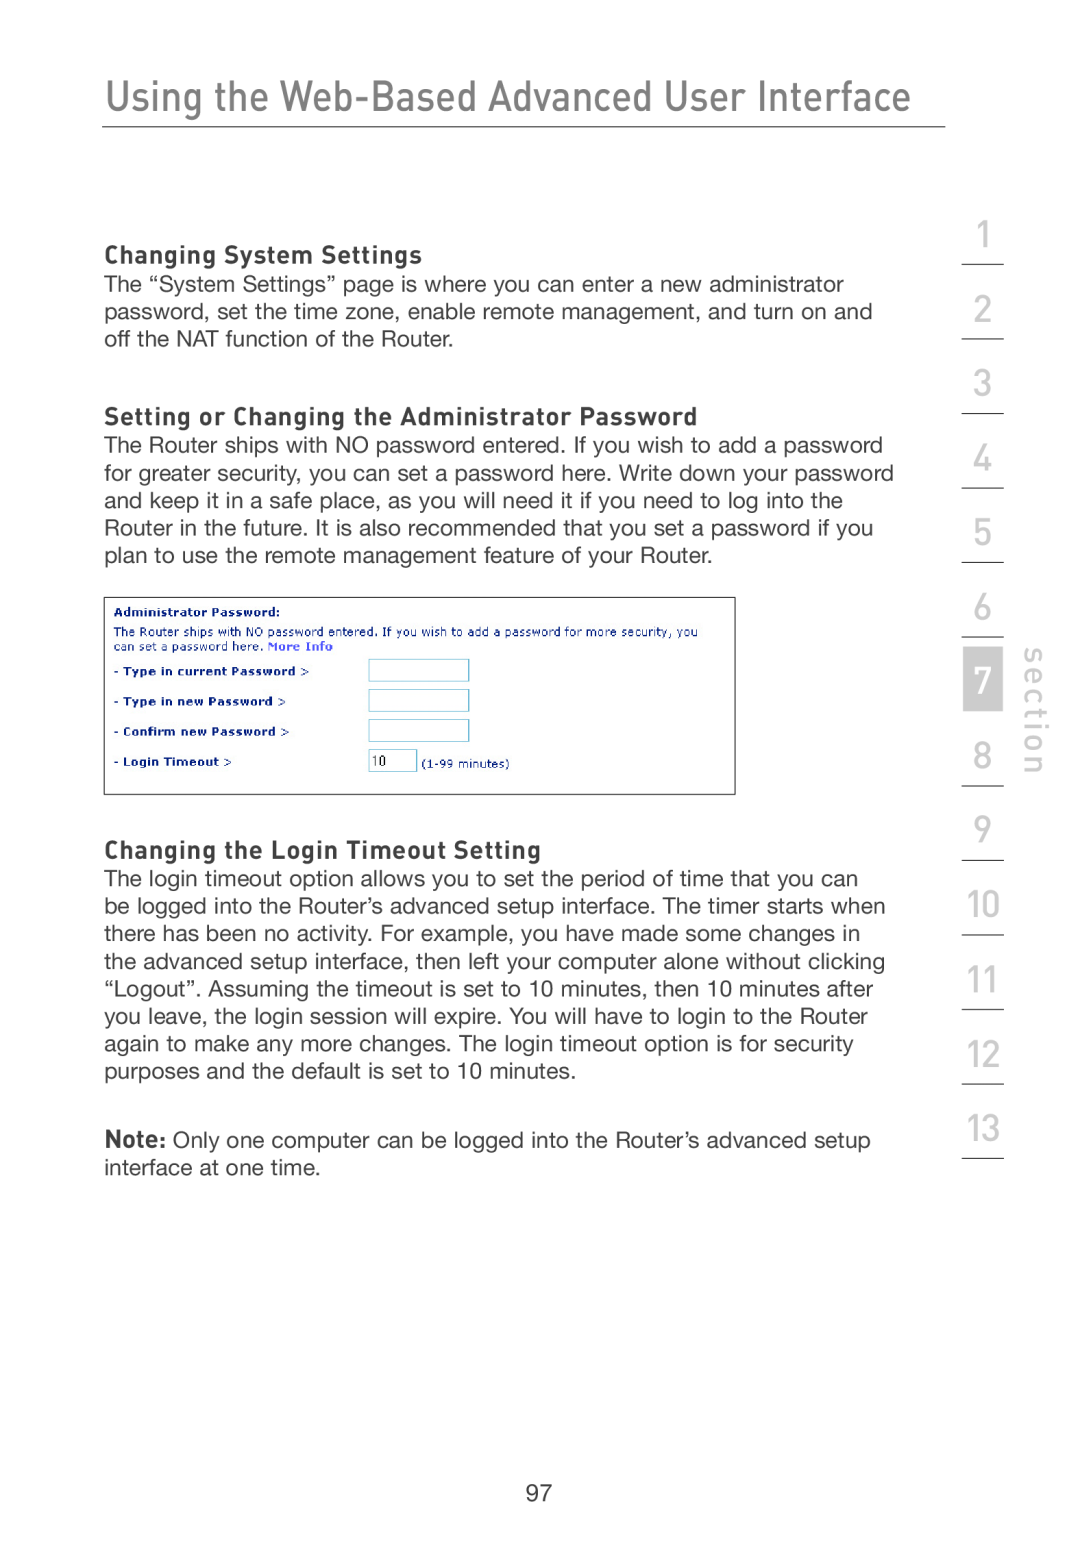 Belkin F5D7231-4P user manual Changing System Settings, Setting or Changing the Administrator Password, section 